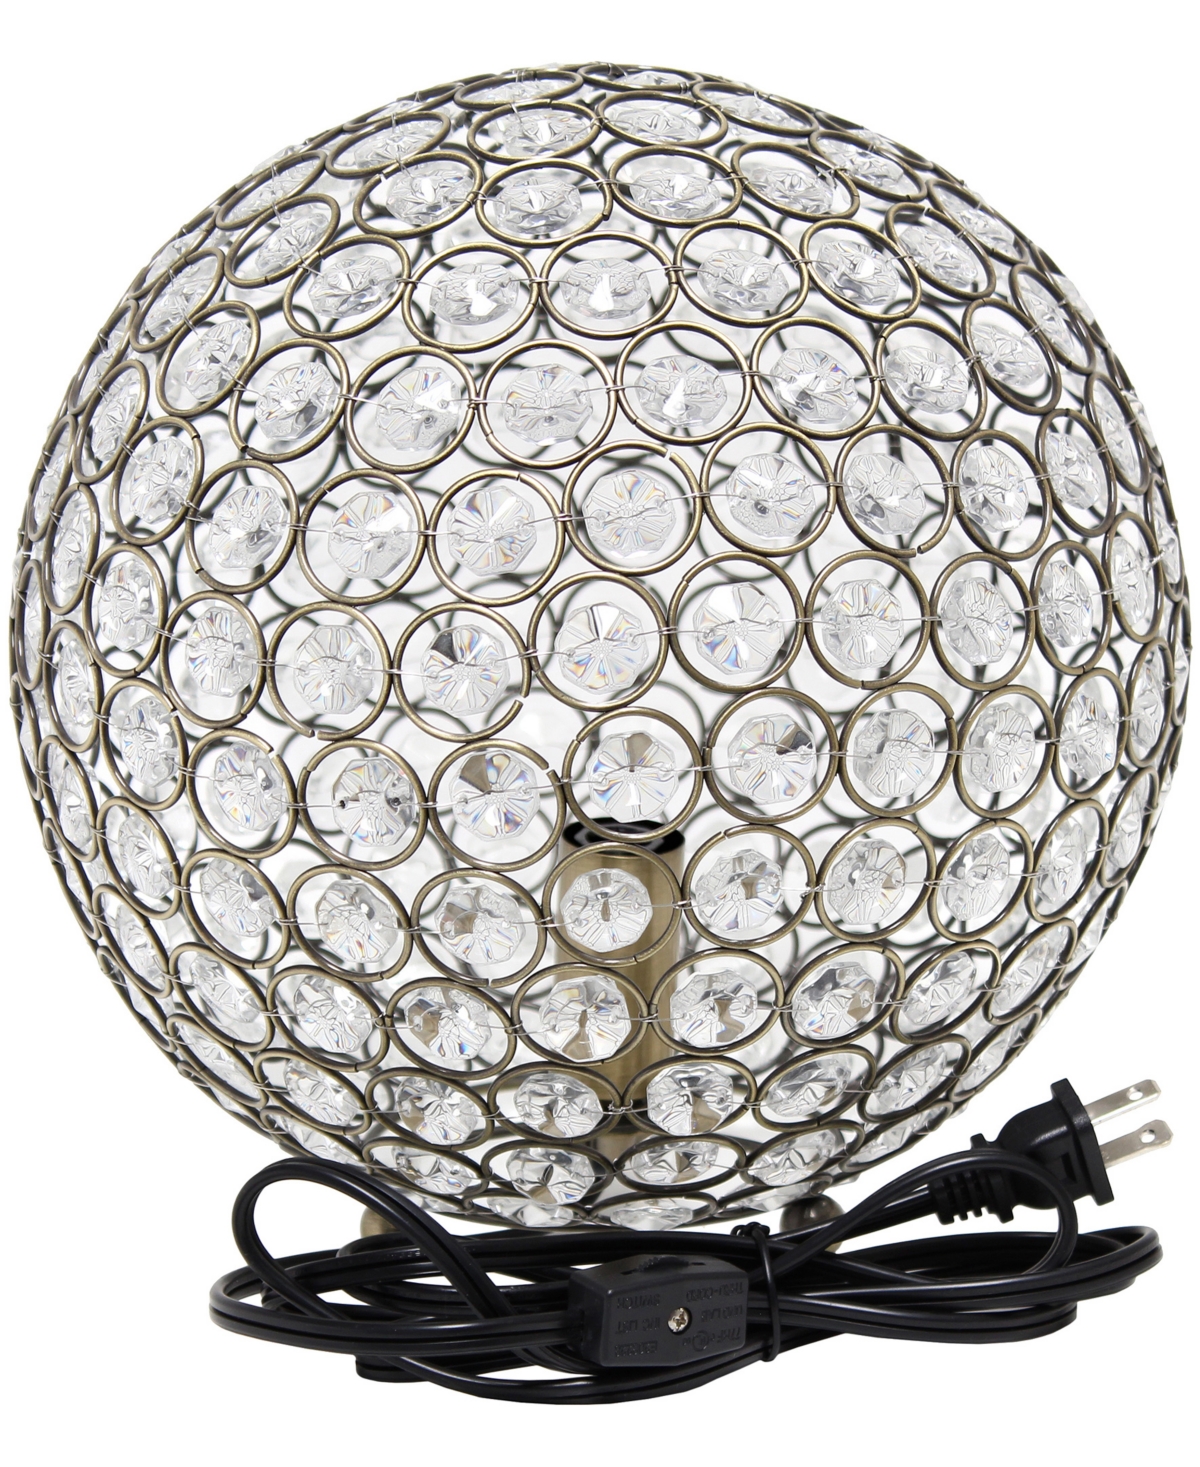 Shop Lalia Home 10" Elipse Medium Contemporary Metal Crystal Round Sphere Glamorous Orb Table Lamp In Antique Brass